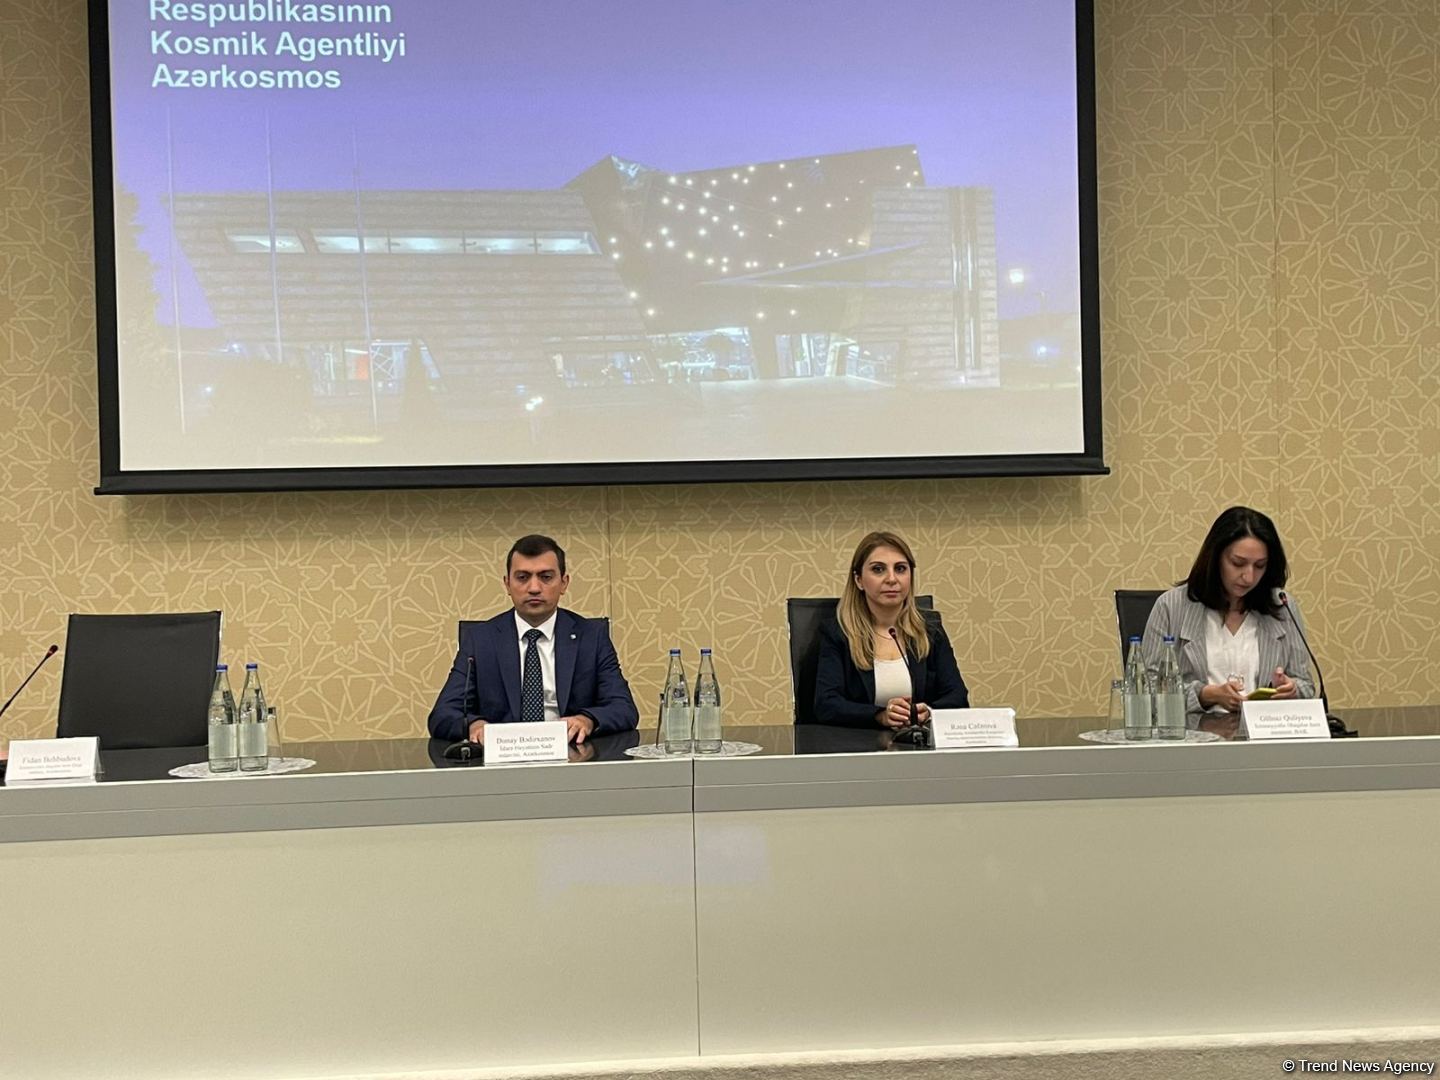 Record number of scientific articles submitted to Int'l Astronautical Congress in Baku (PHOTO)